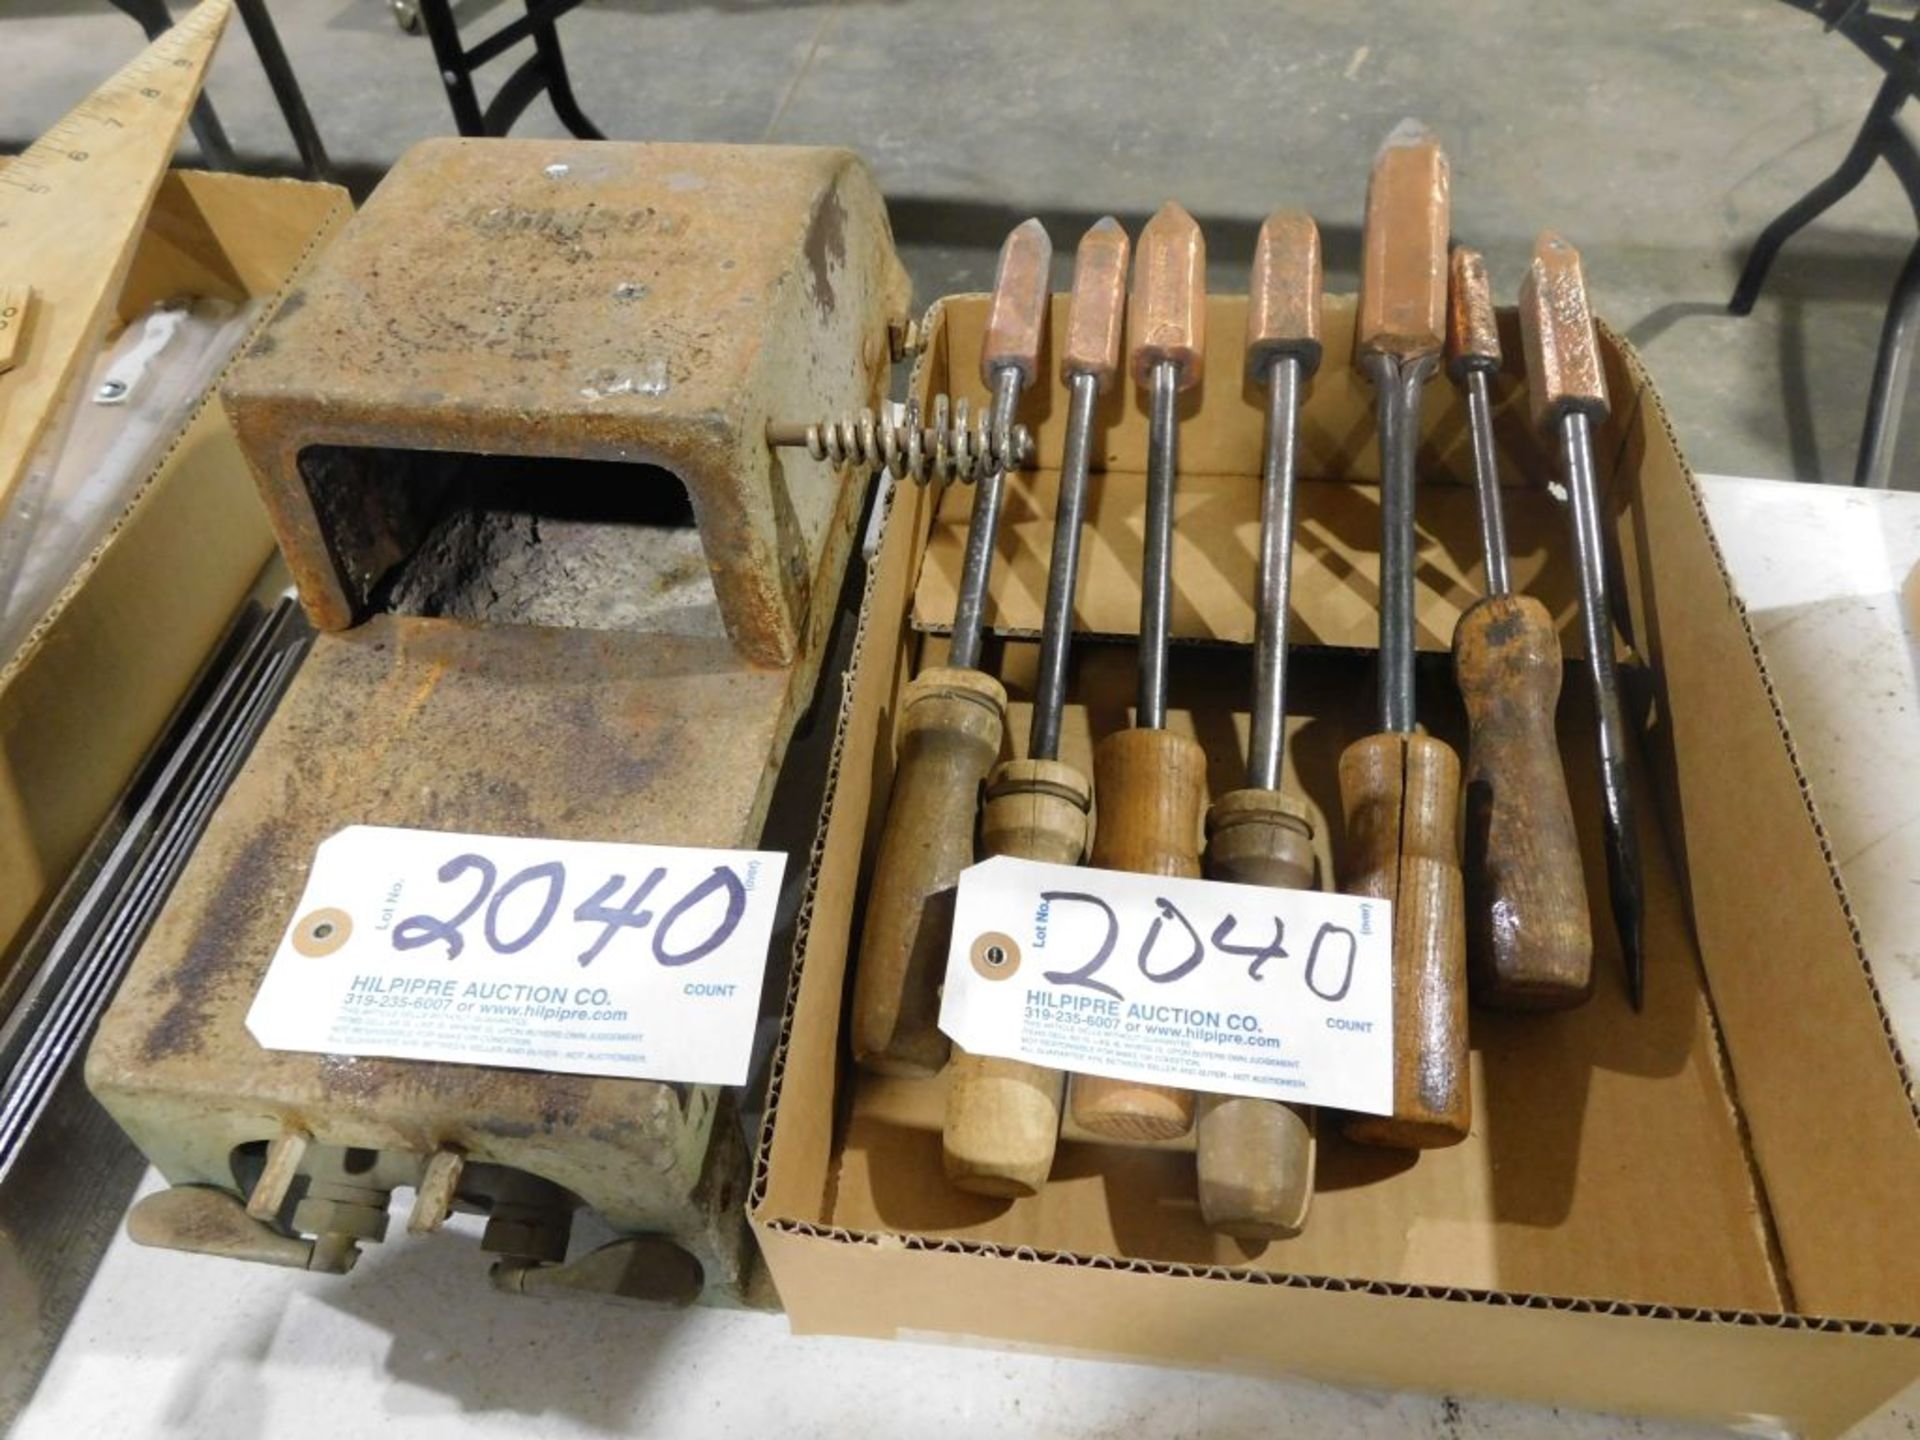 Solder oven and (approx. 8) Johnson solder irons.